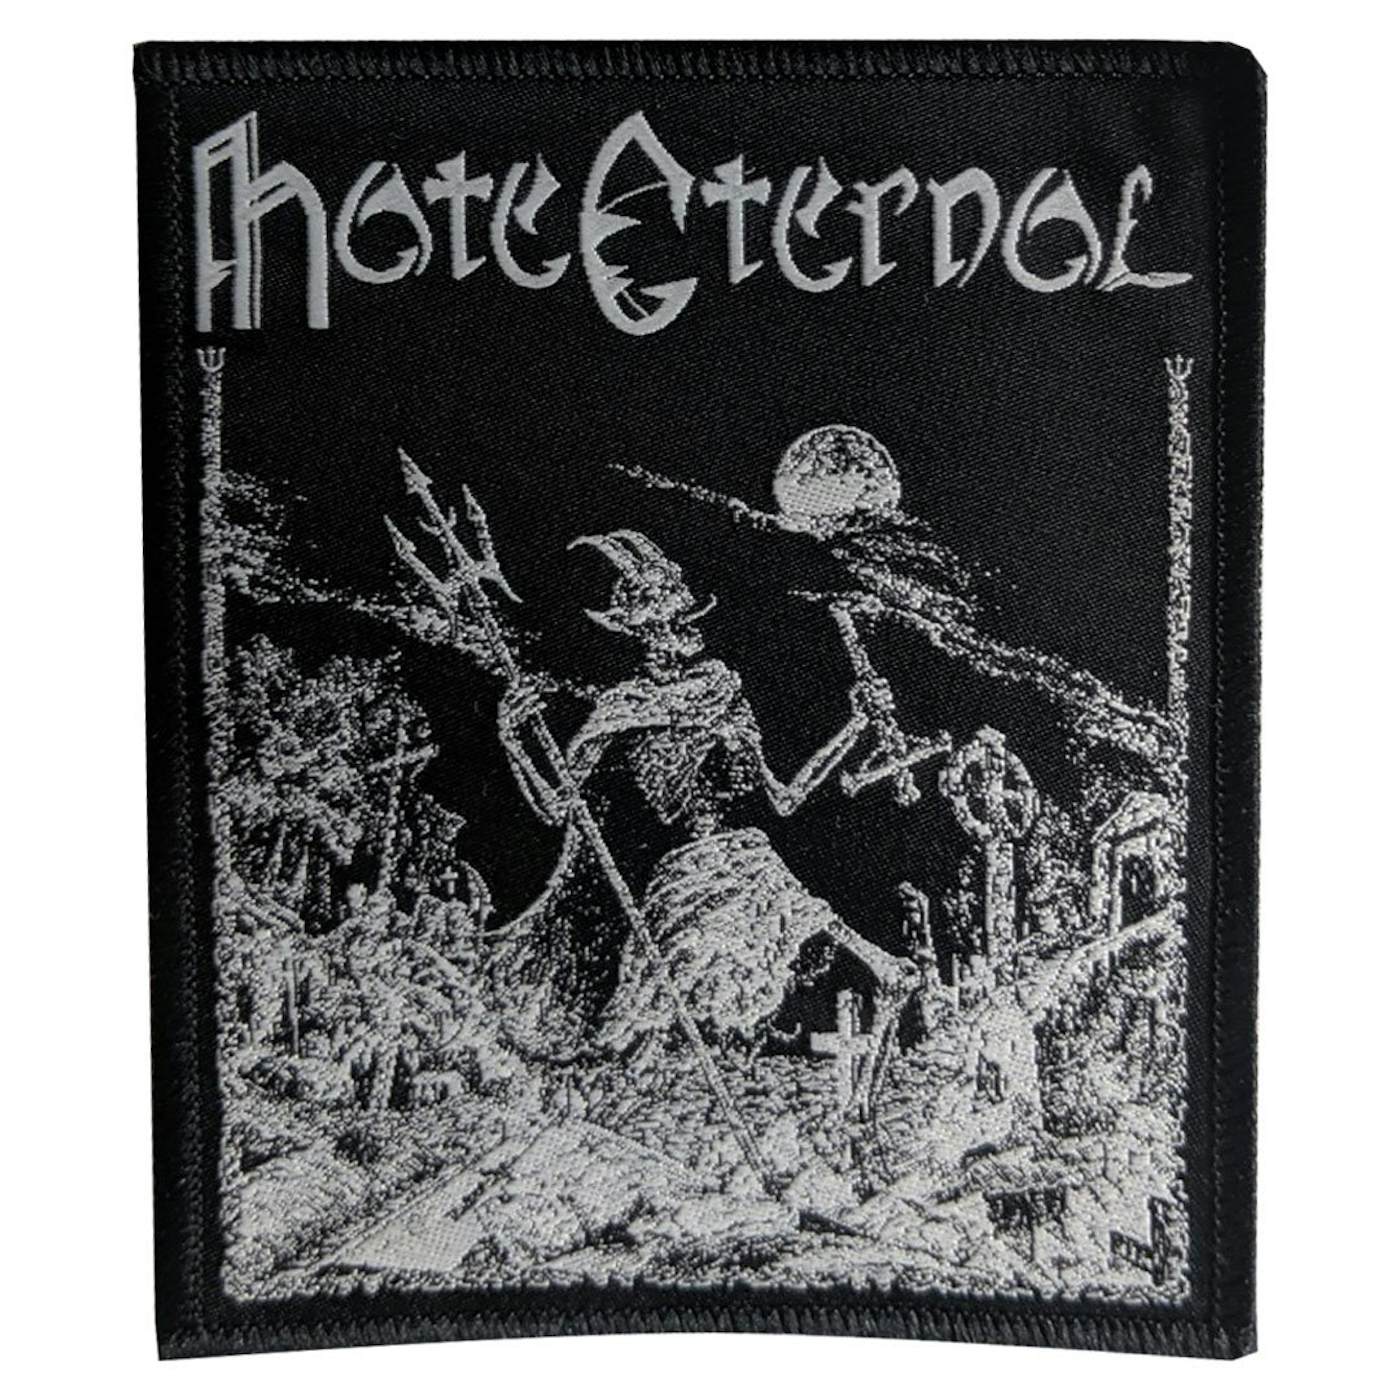 Hate Eternal Thorncross Patch